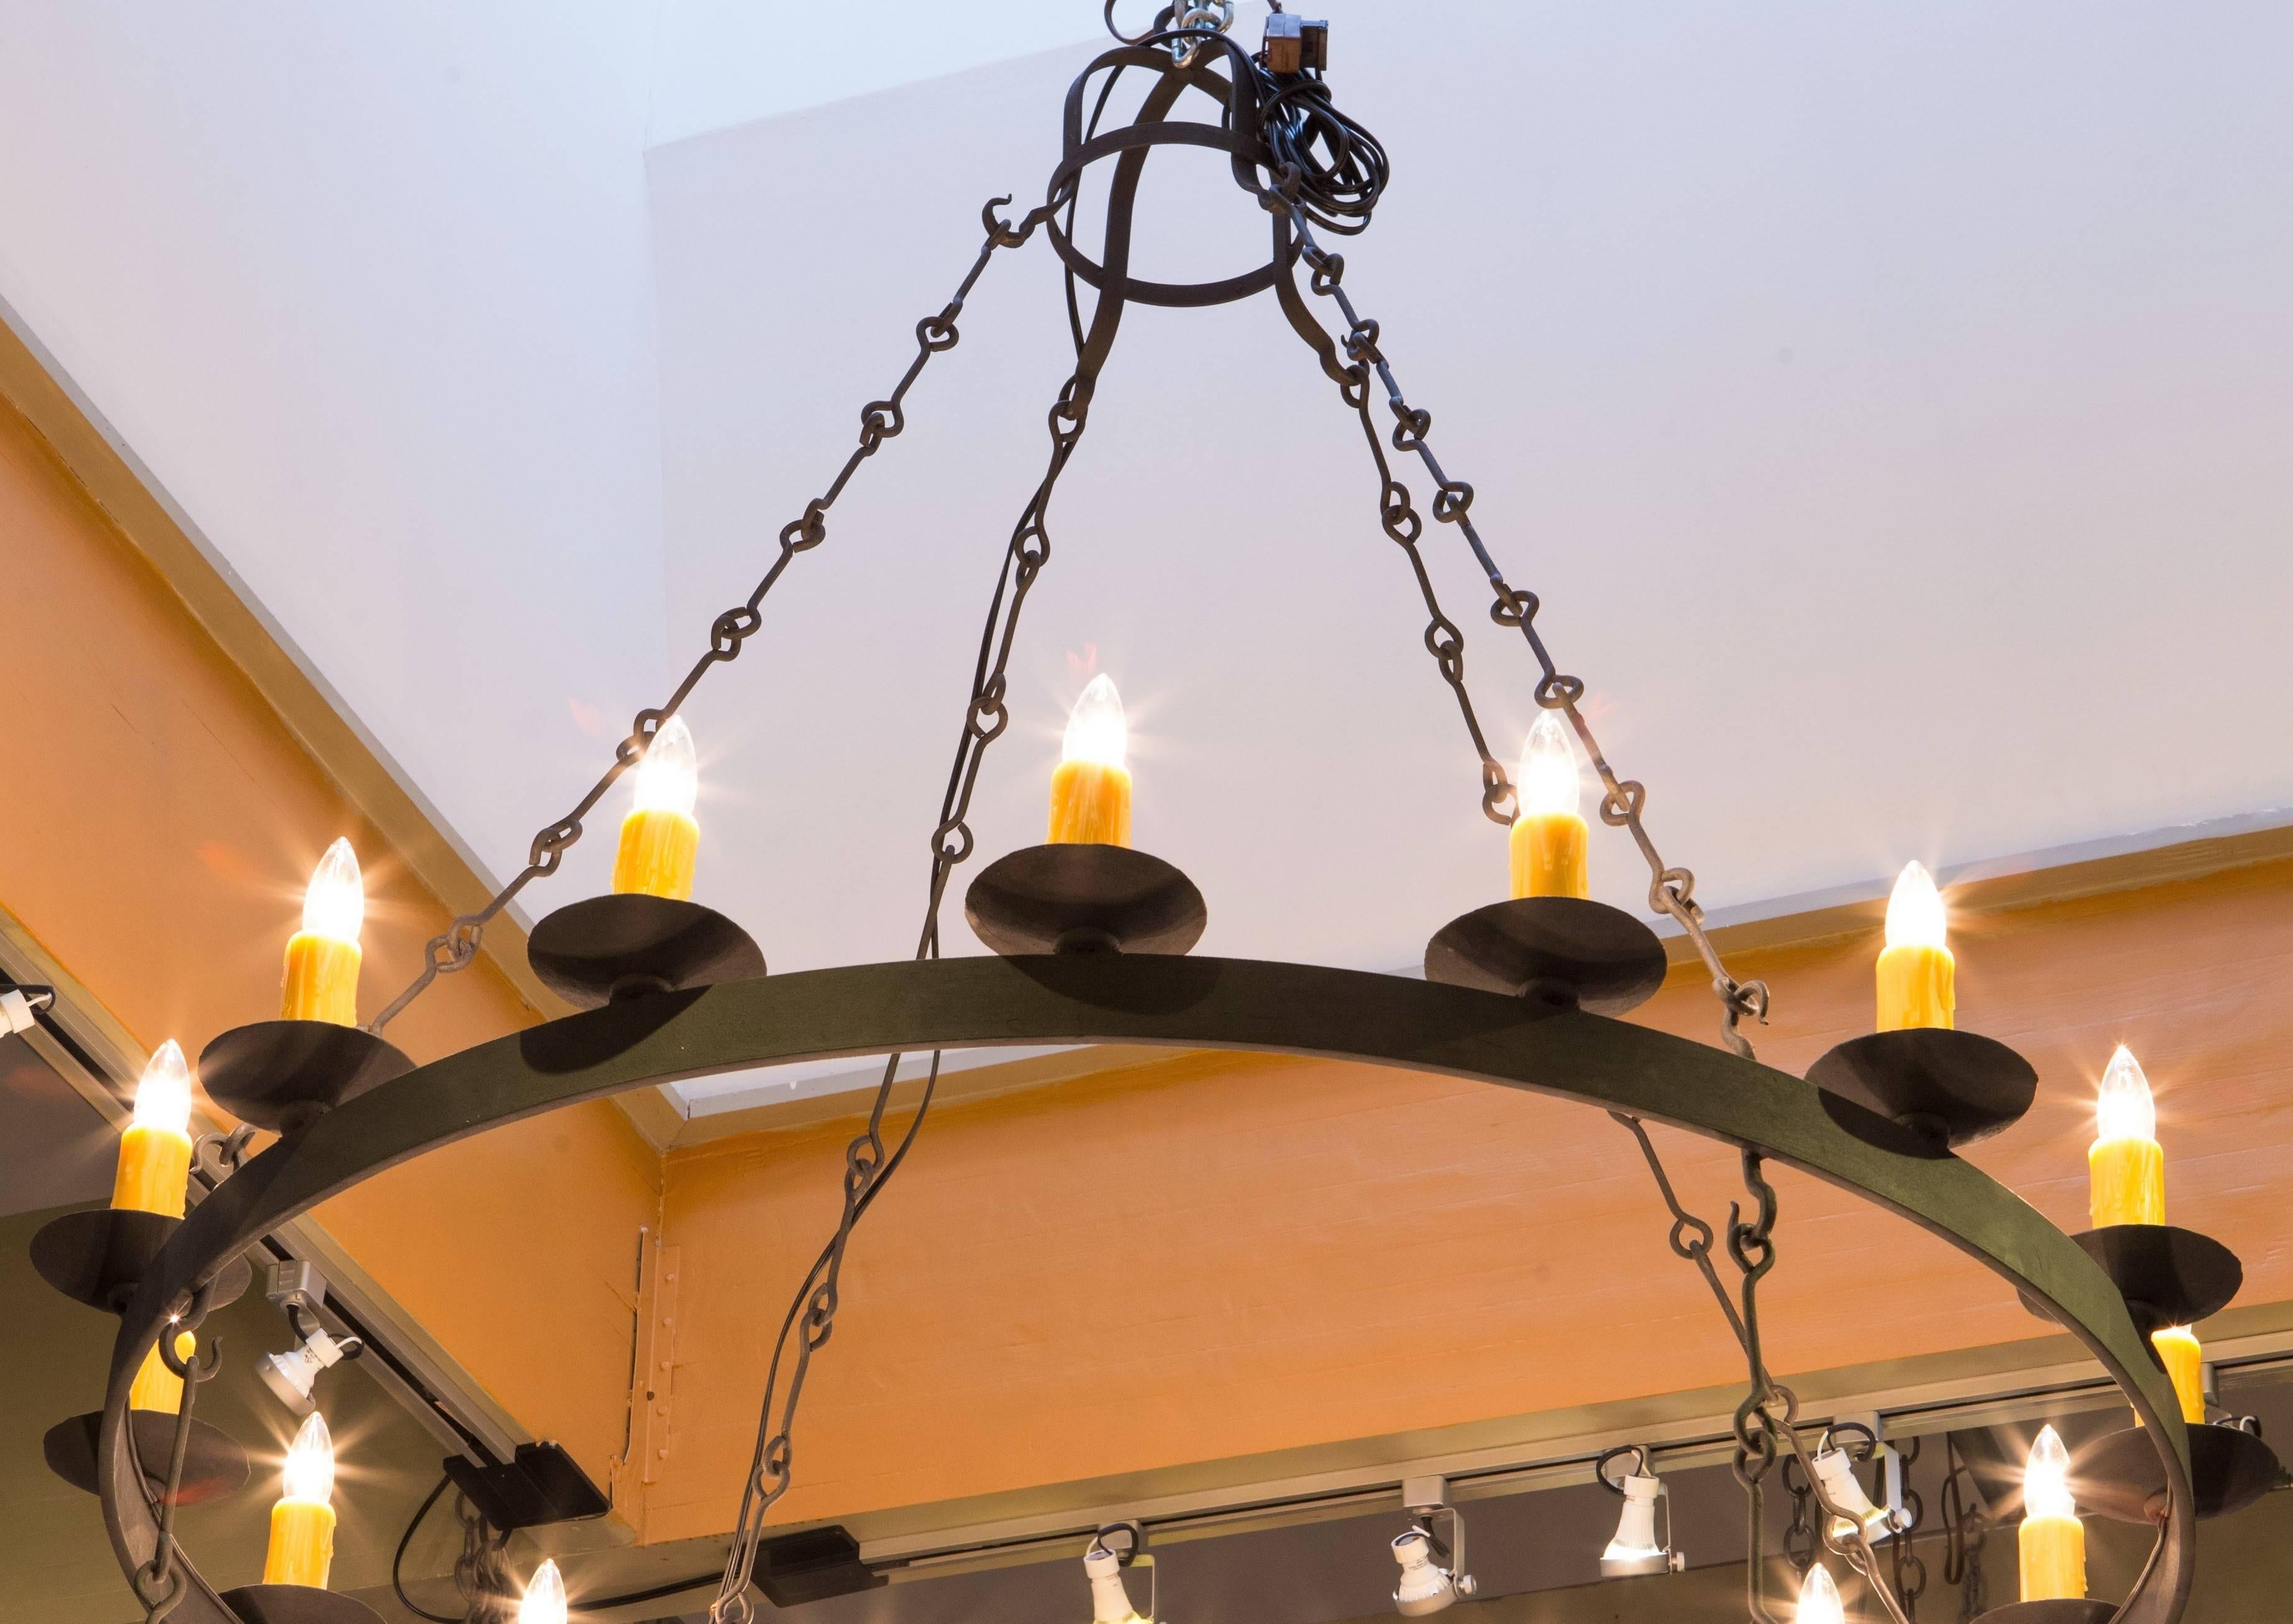 Fixture is blacksmith-made in the US according to our specifications and is wired in the US.
Some alterations is size, sockets, etc. are possible. The fixture is nice for a Classic or modern interior.
The measurement of the height is to where the